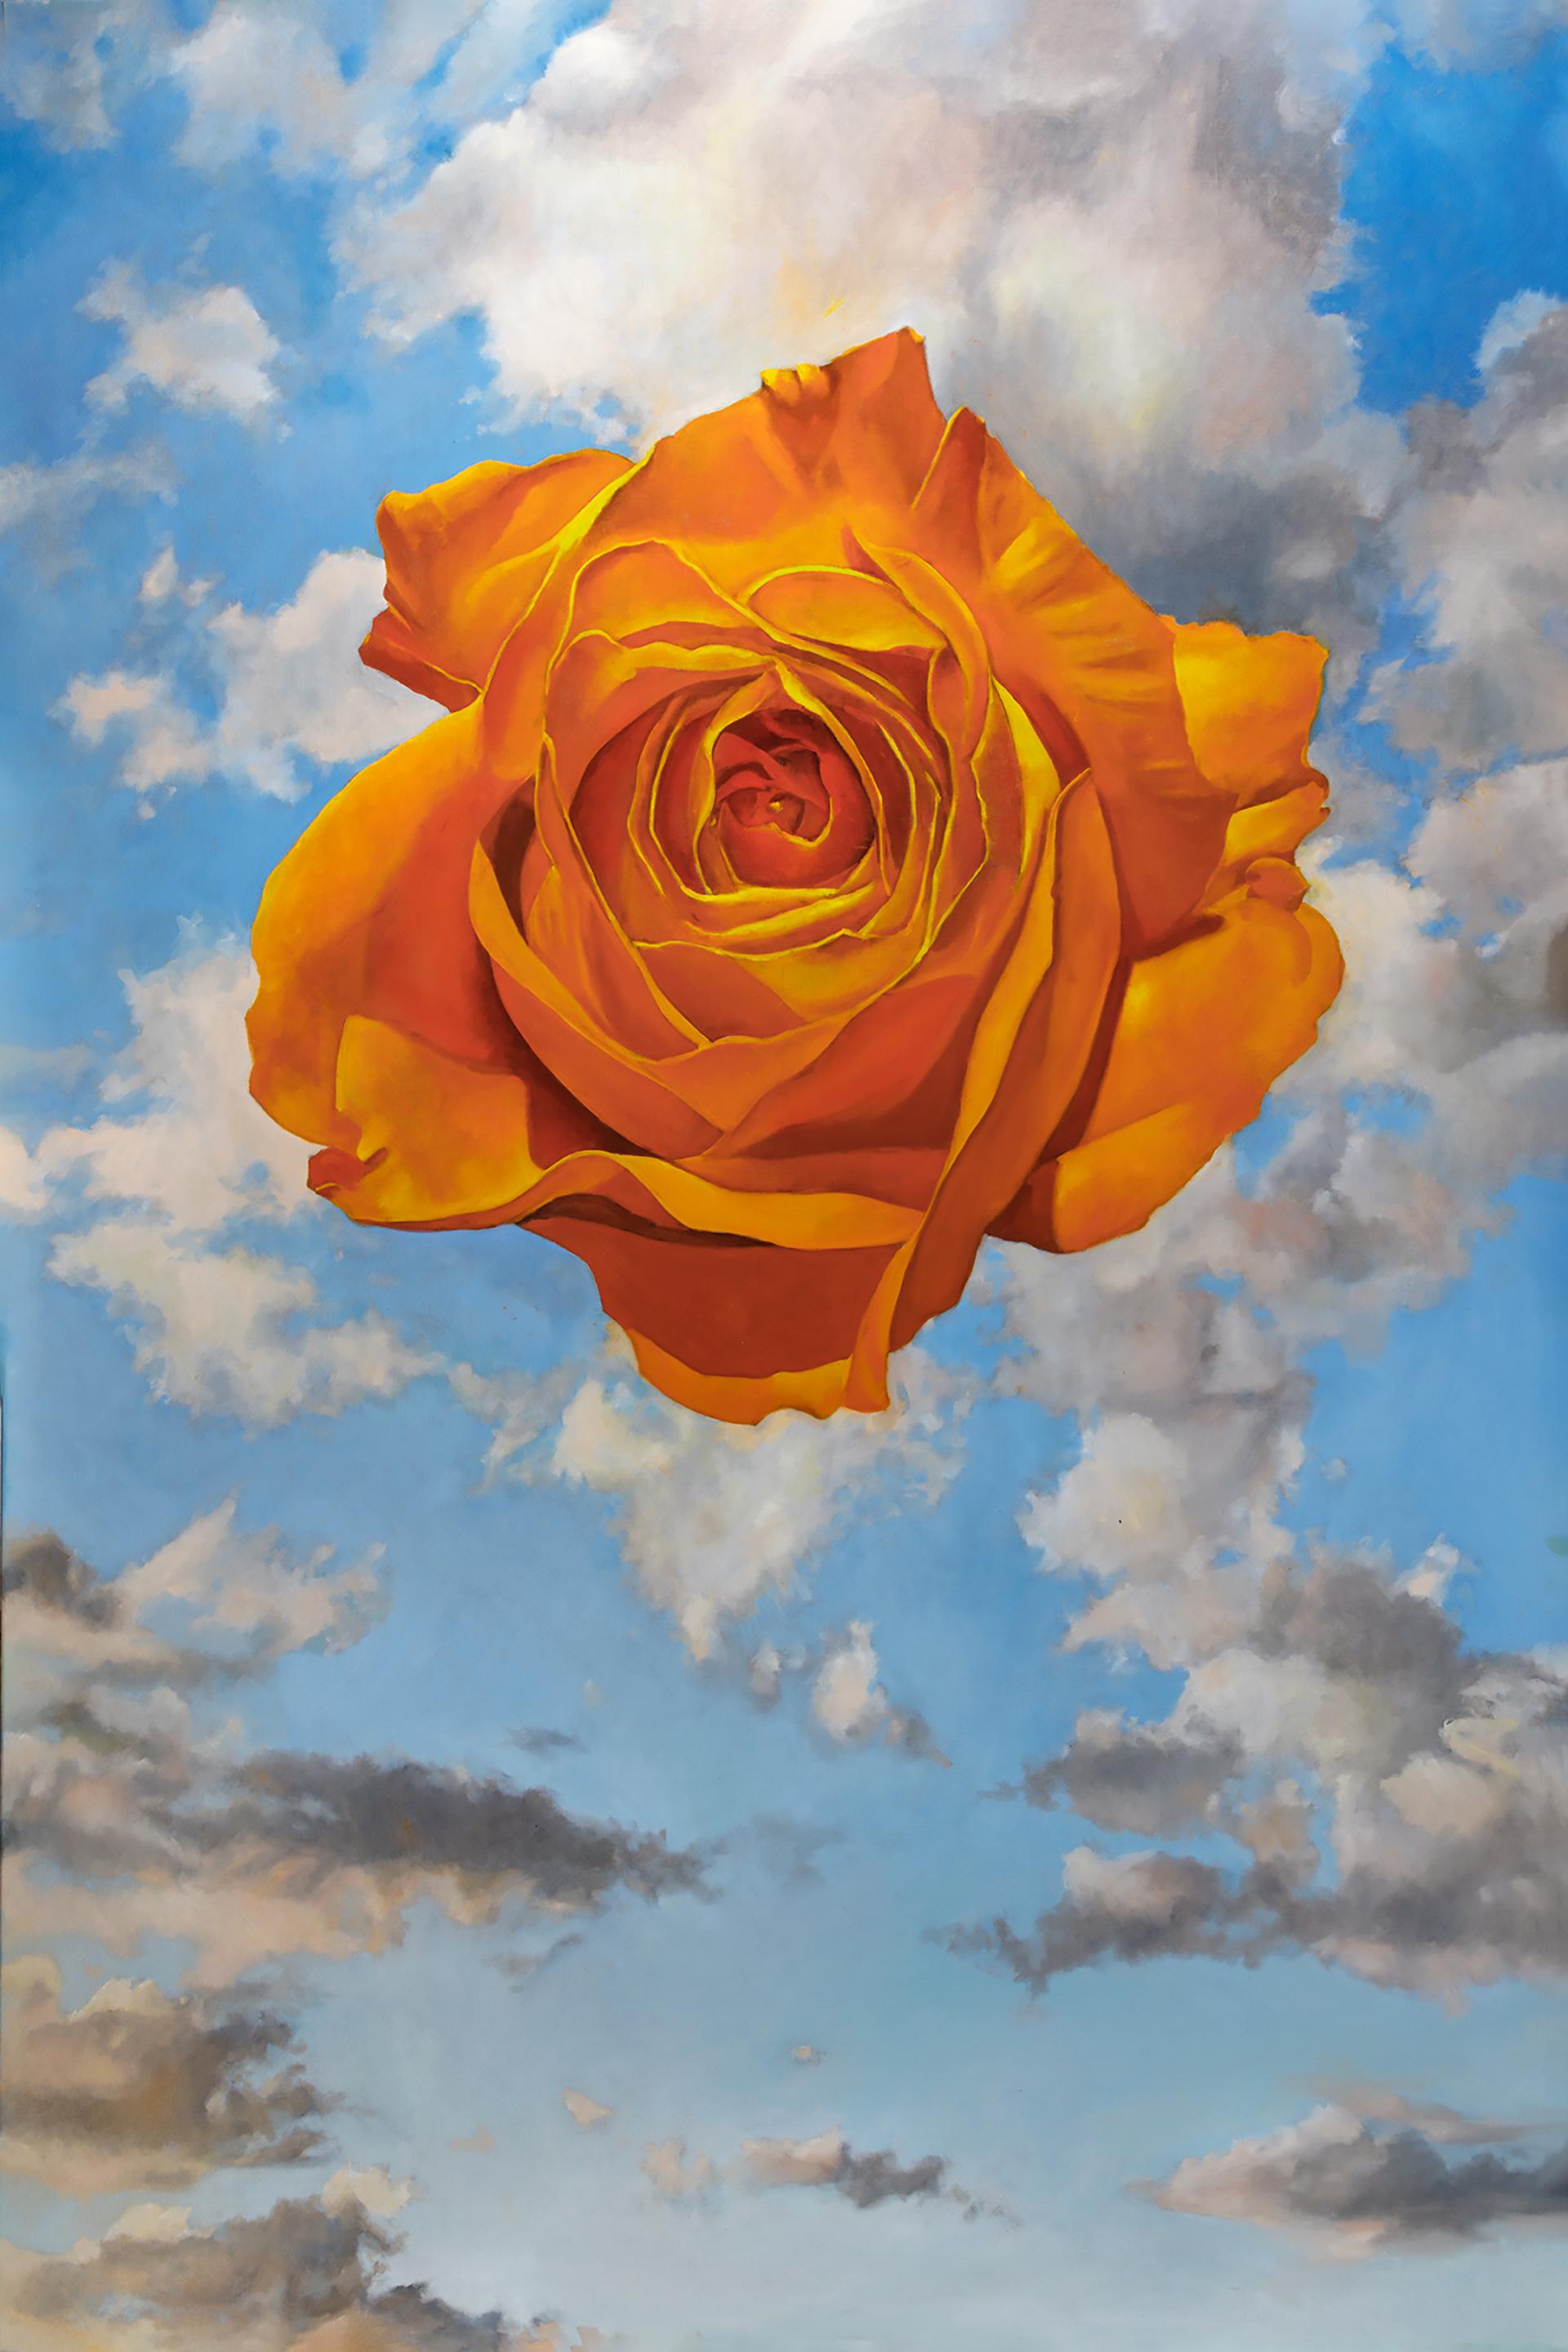 "Acolyte" - surreal floral painting - clouds - Rene Magritte